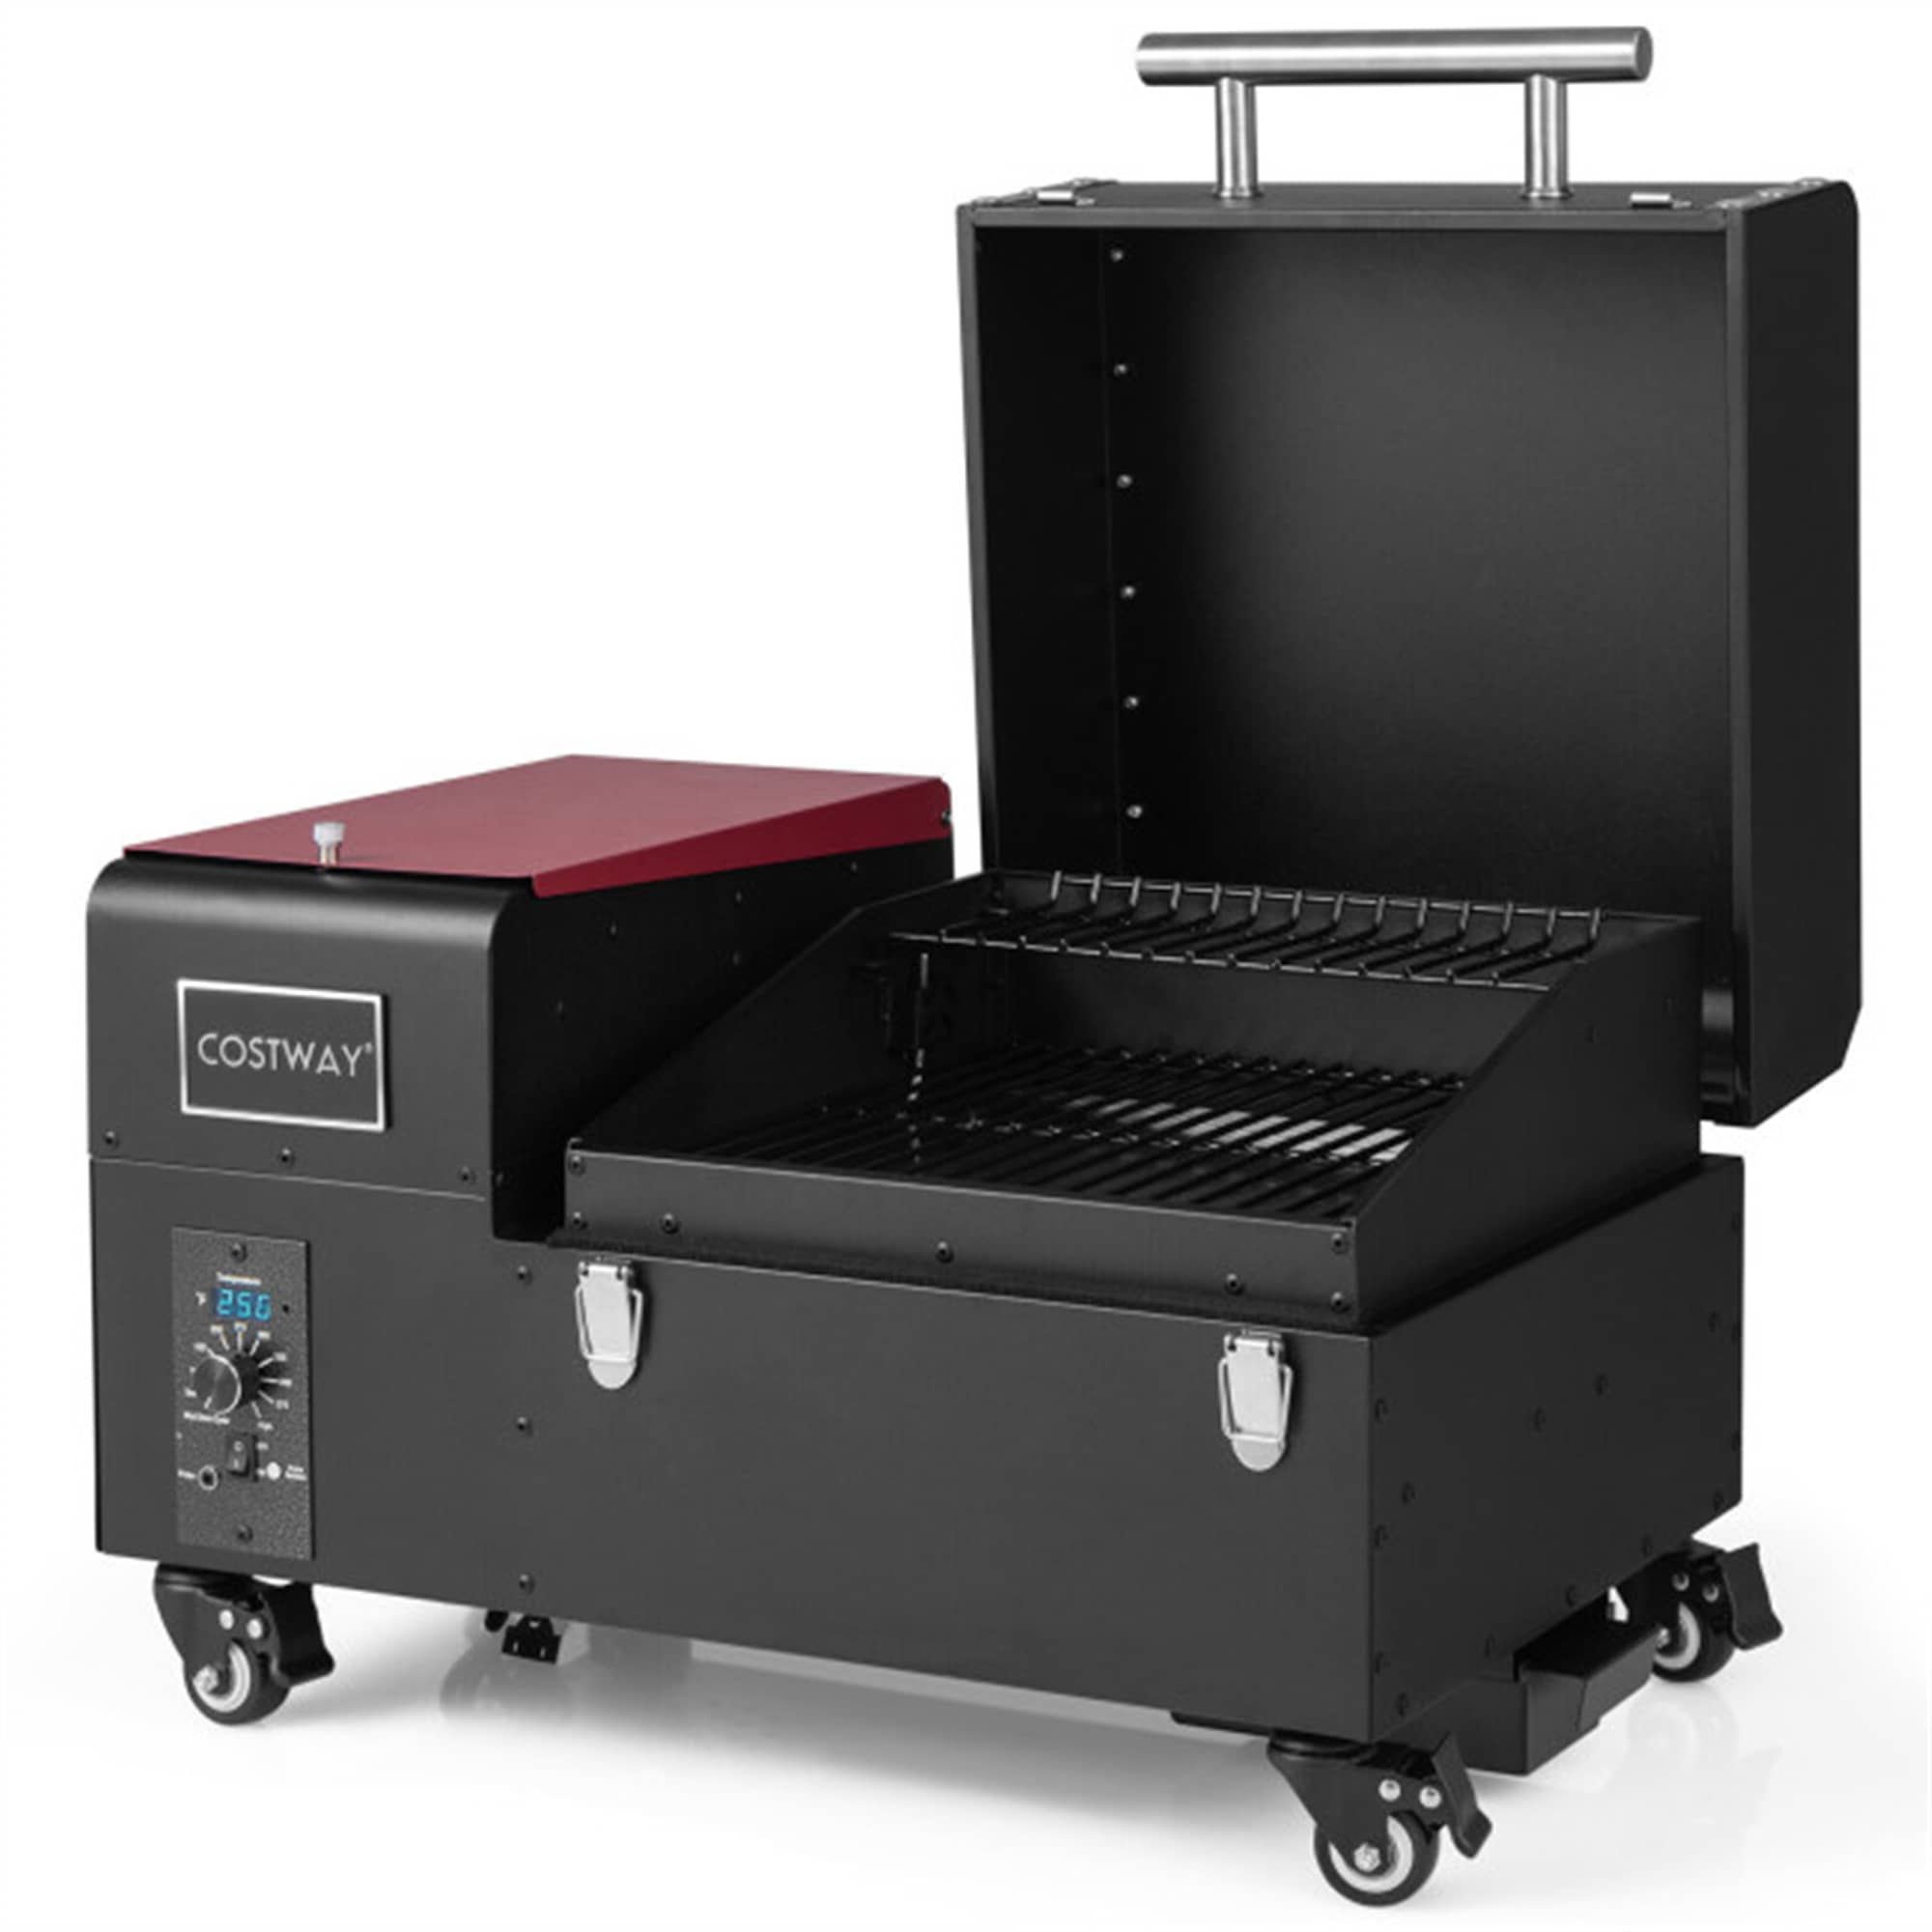 CASAINC Movable Pellet Grill and Smoker with Temperature Probe